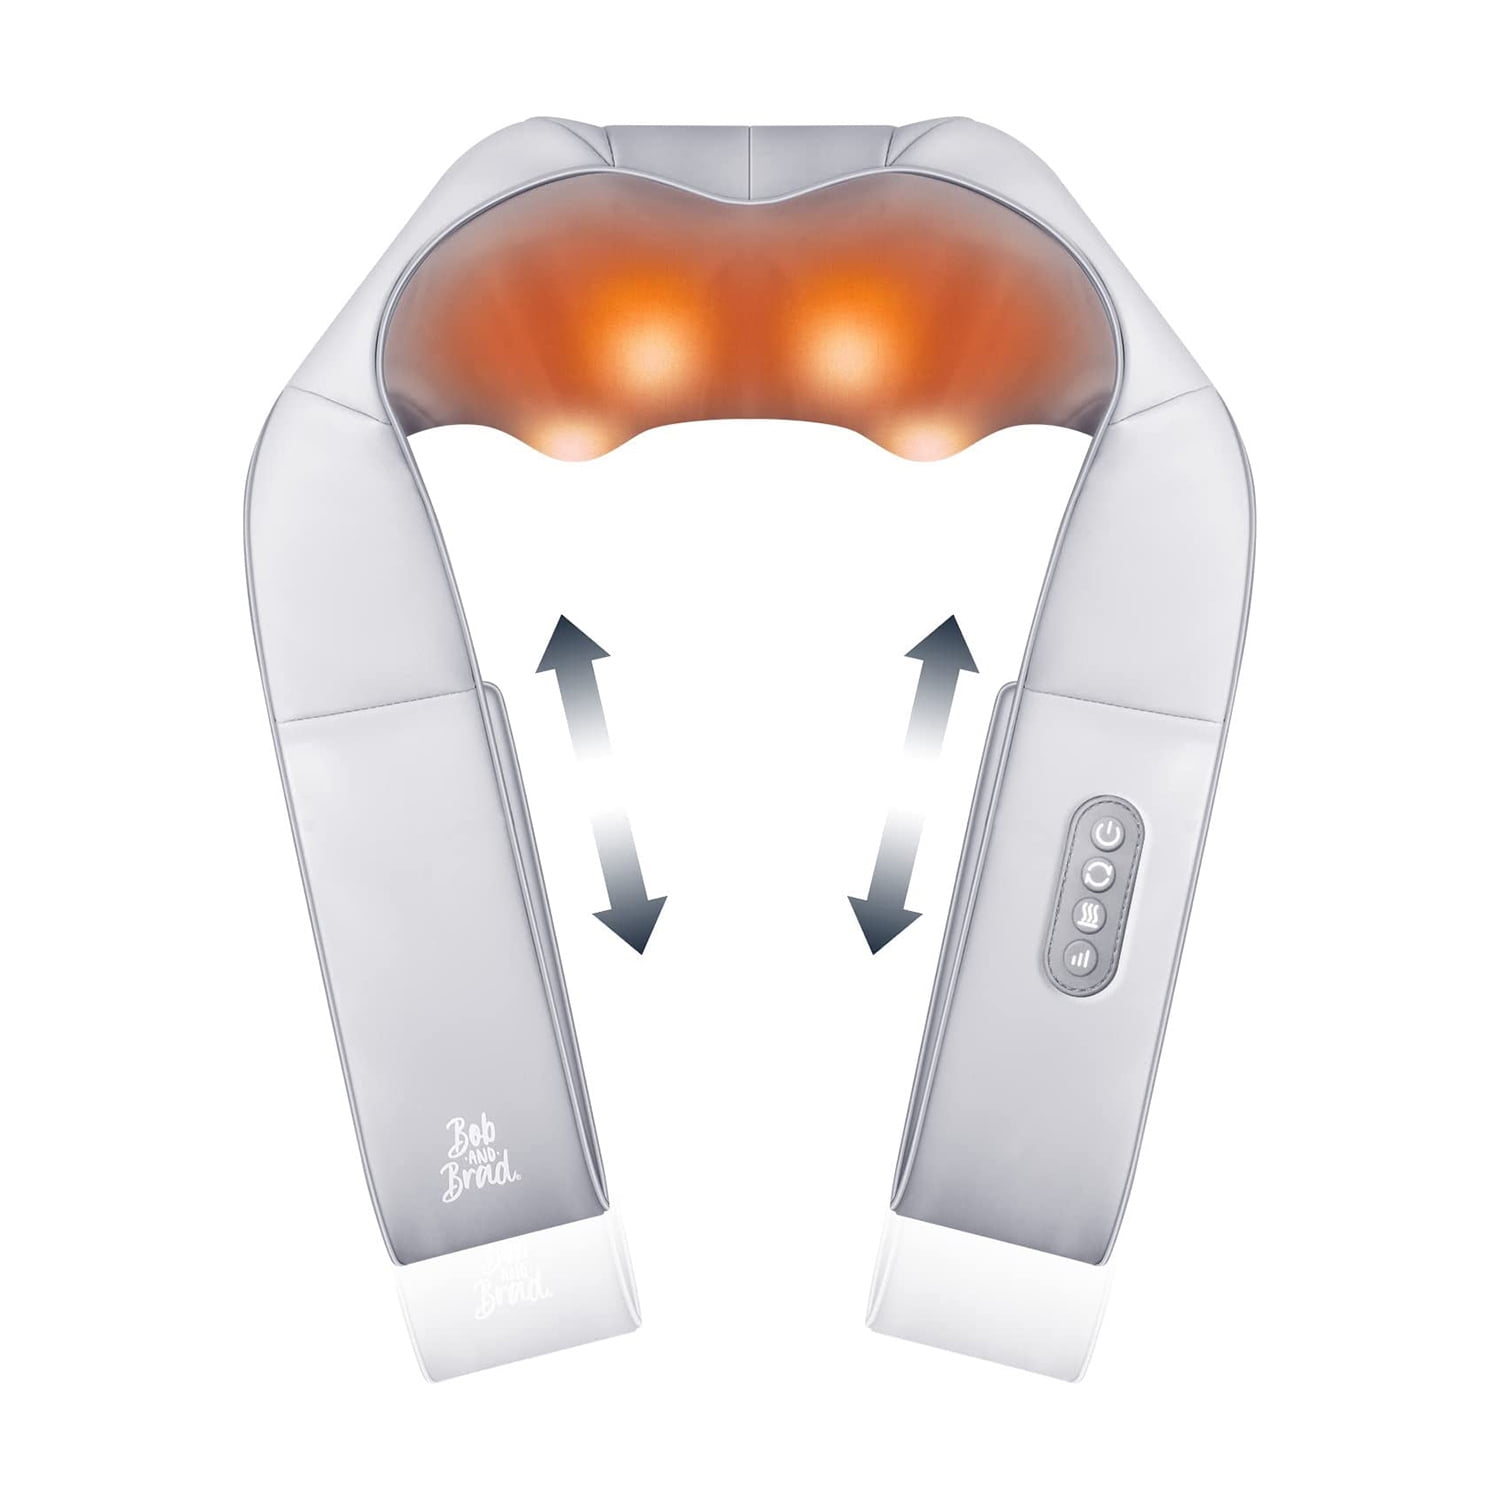 Ready to say goodbye to pain? Say 'Hello' to the InTENSity 10 Digital